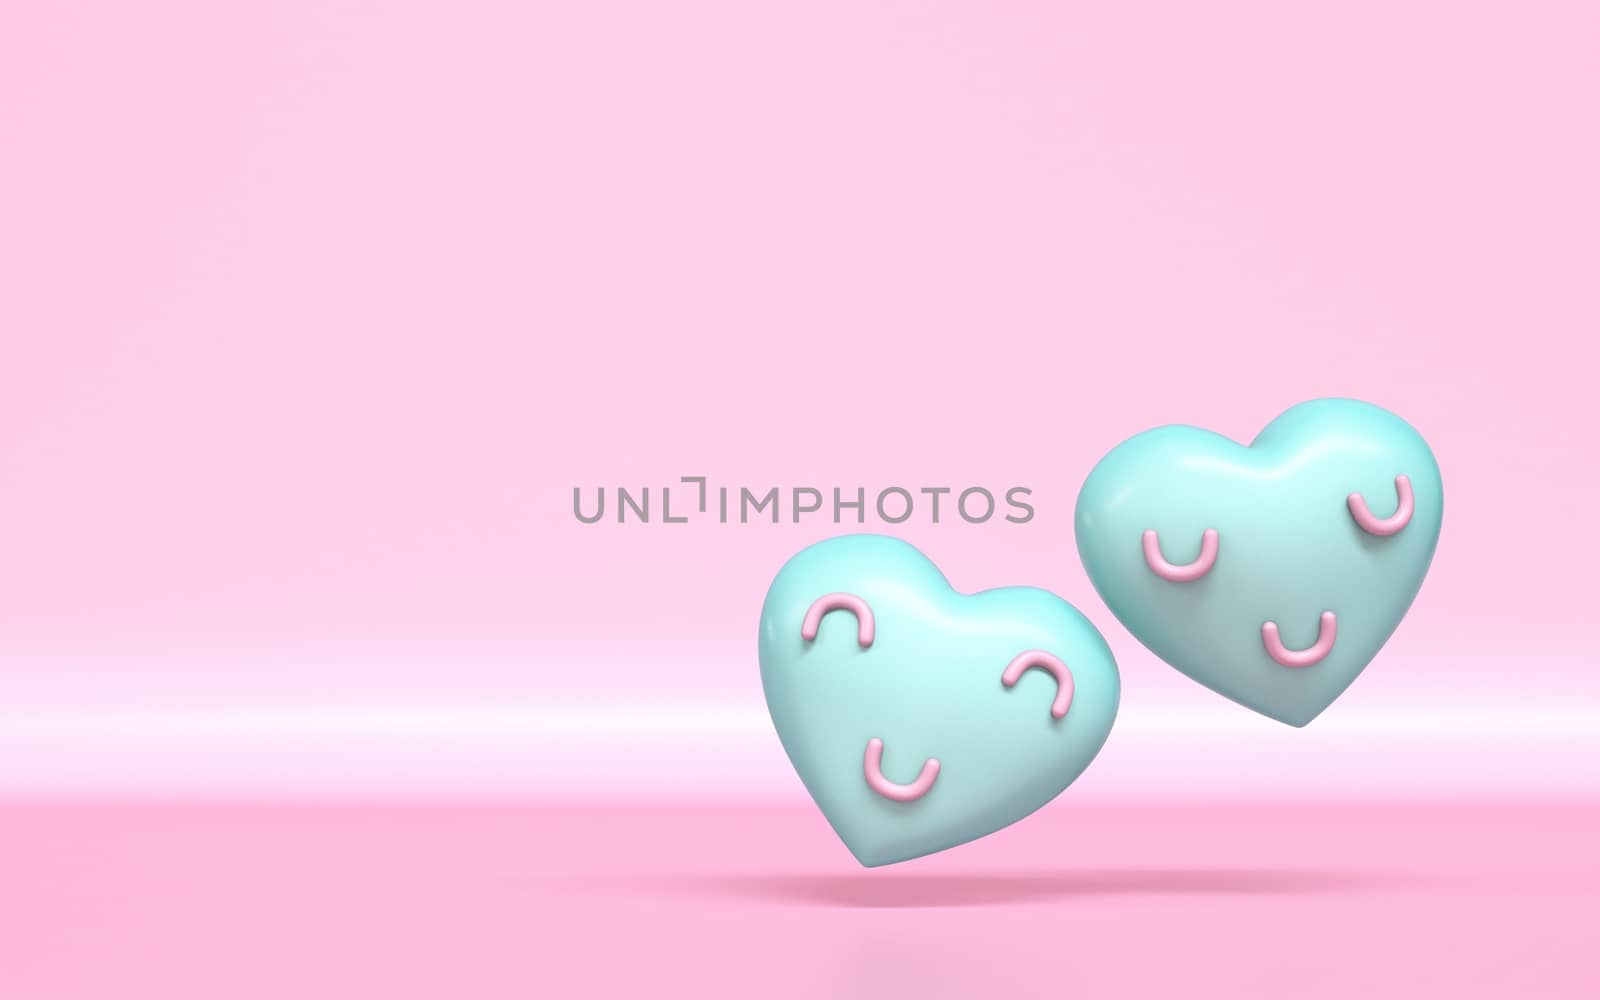 Two hearts with smile faces 3D rendering illustration on pink background